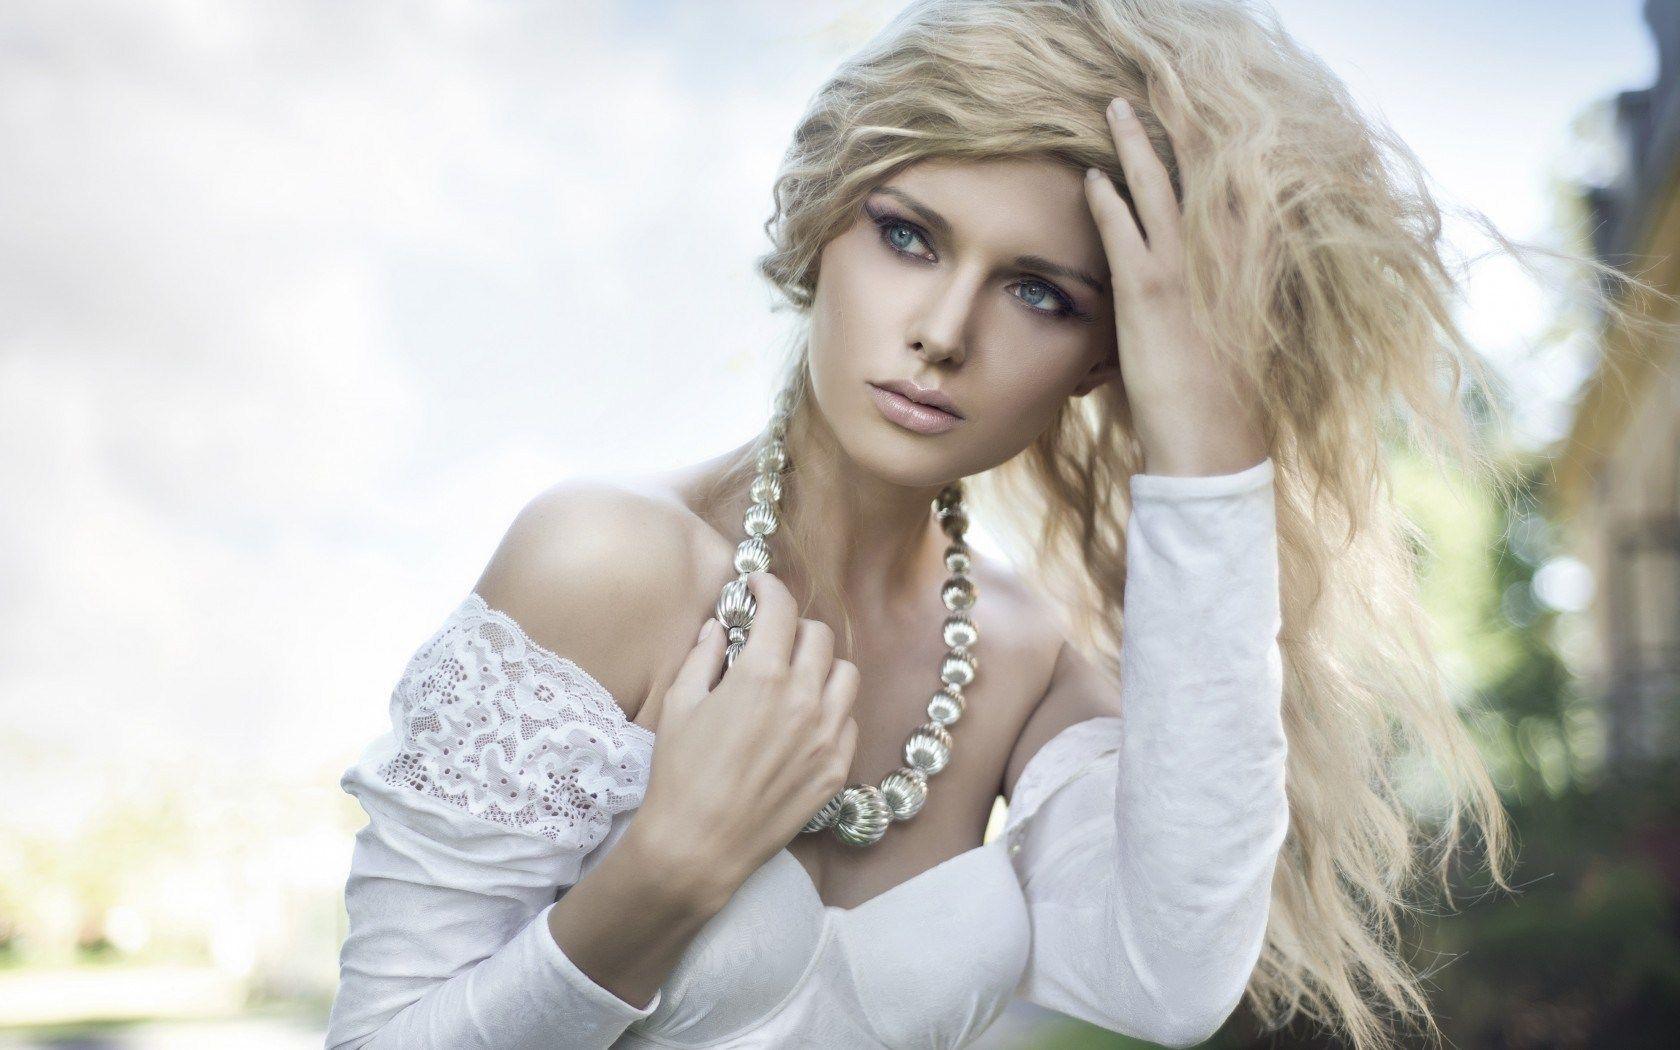 Girl Blonde Luxury Big Silver Necklace Fashion HD Wallpaper. Cool